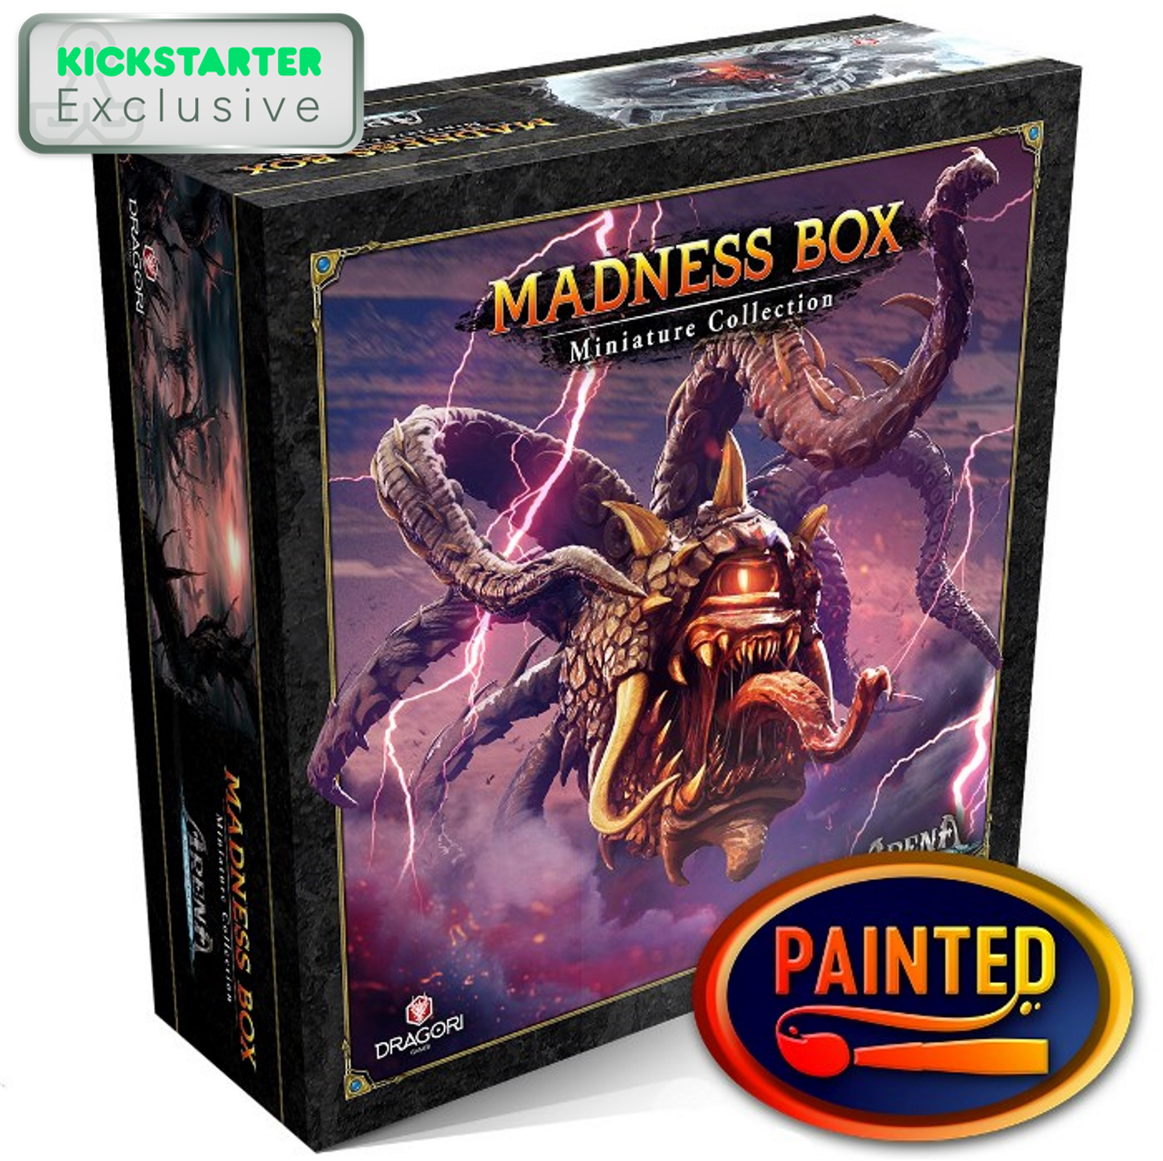 Tanares Adventures Ultimate All-In, Painted Edition, Madness Box Expansion